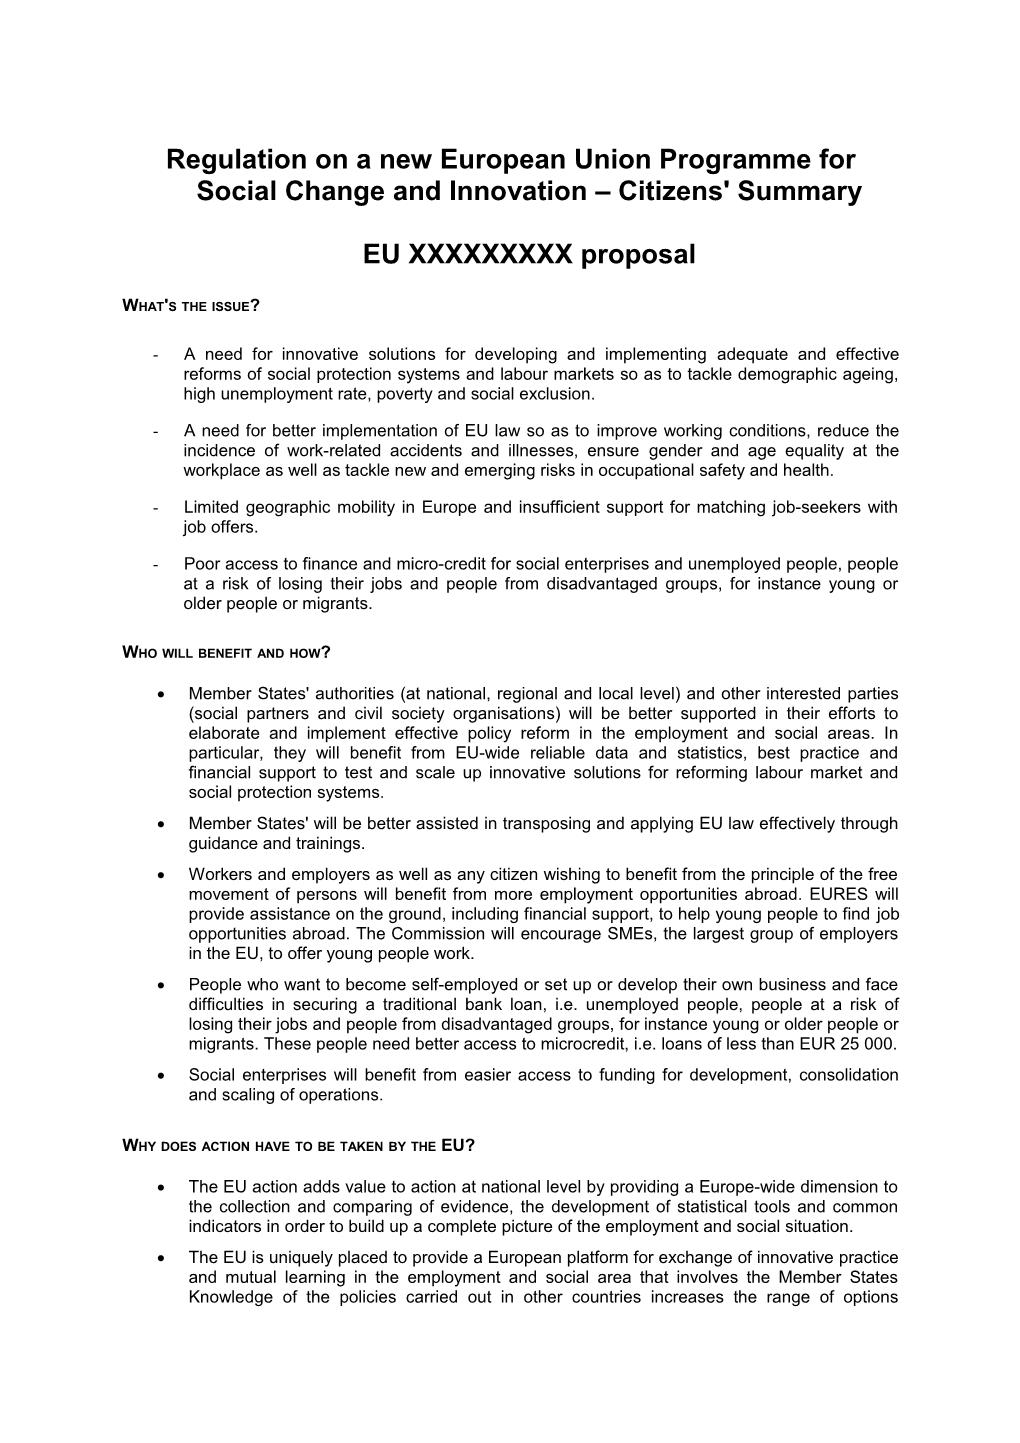 Decision on a New European Union Programme for Social Change and Innovation Citizen's Summary